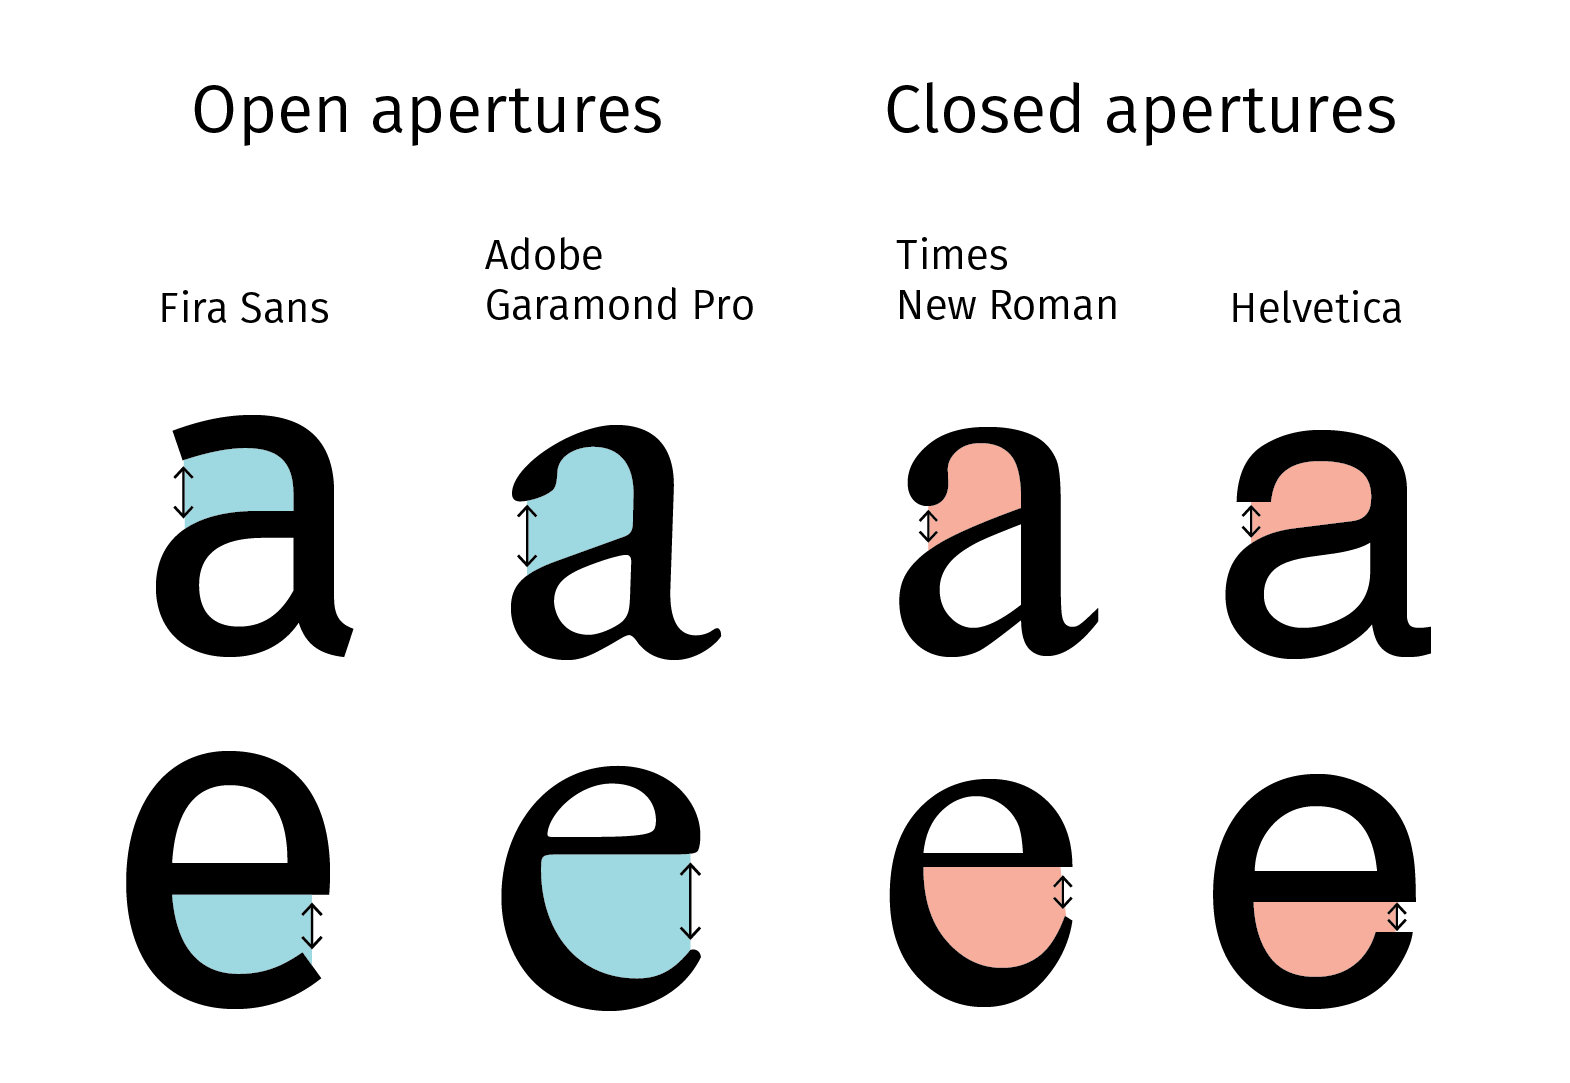 Examples of open and closed apertures on serif and sans serif lower case, two story a characters.